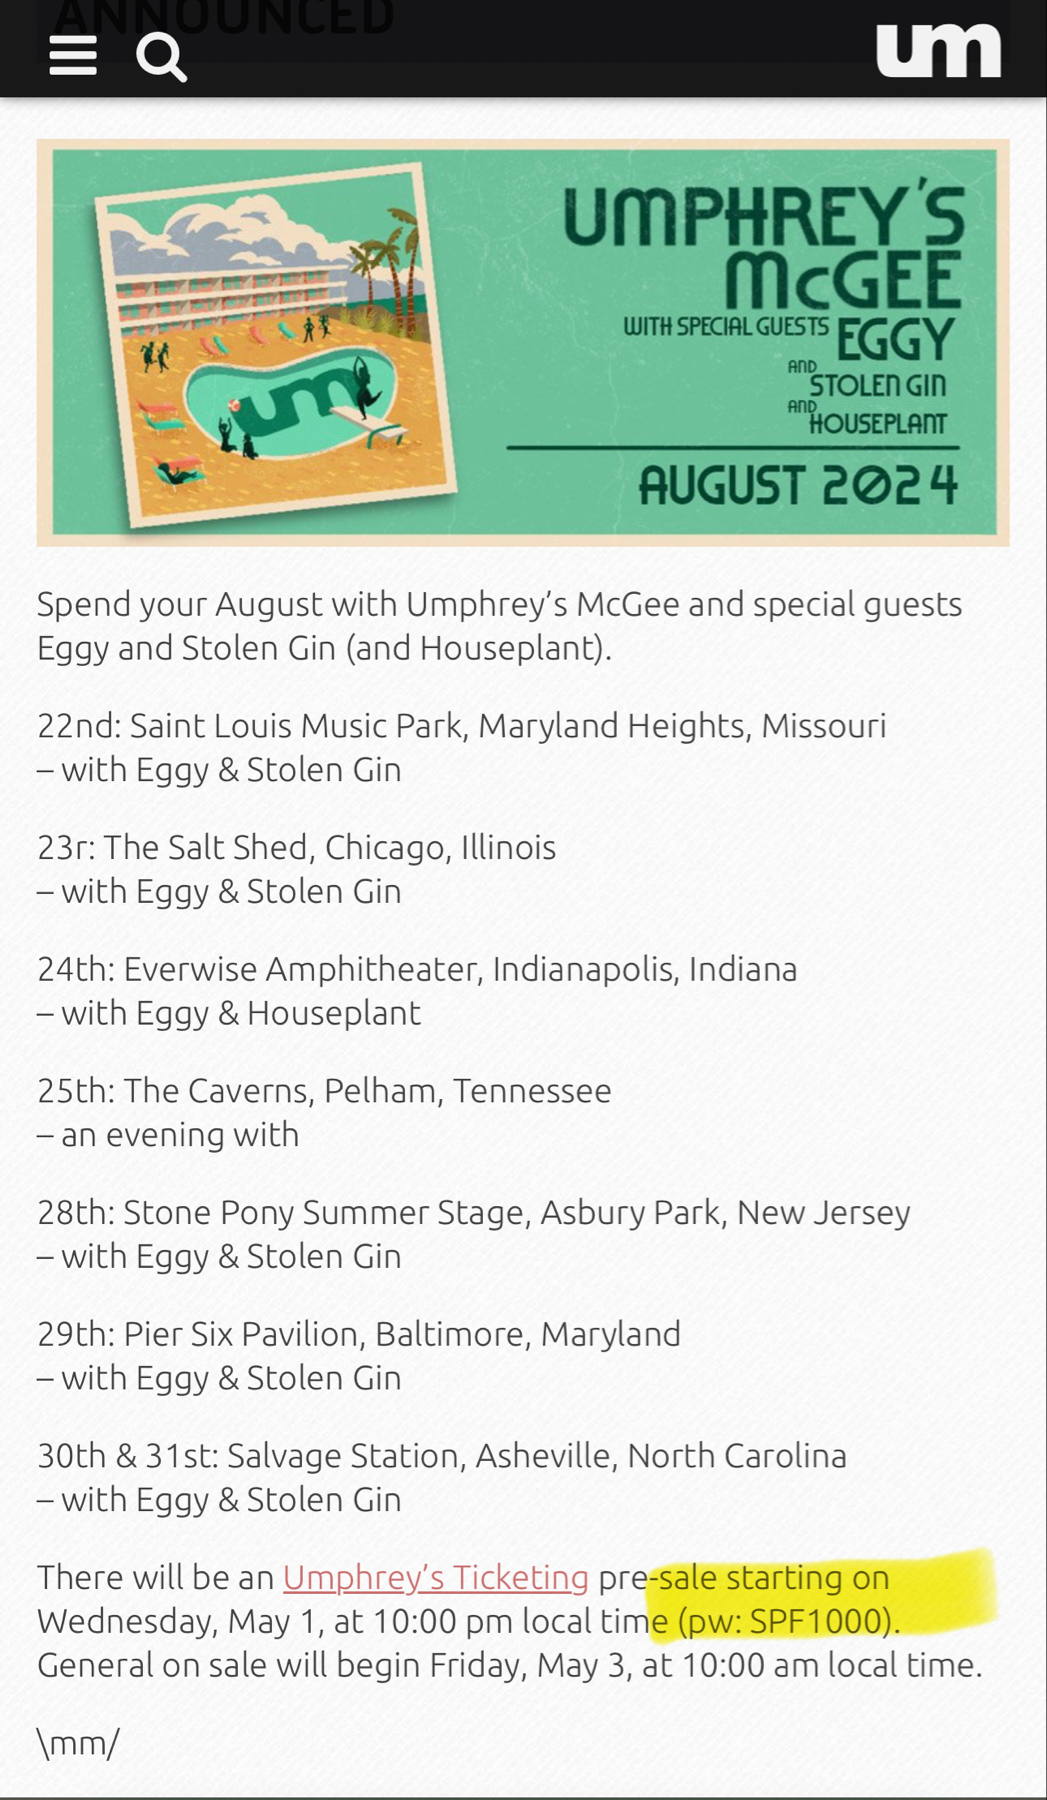 The image shows a concert announcement for Umphrey’s McGee with special guests Eggy, Stolen Gin, and Houseplant in August 2024. The dates and venues of the concerts are listed, with cities including St. Louis and Indianapolis. 